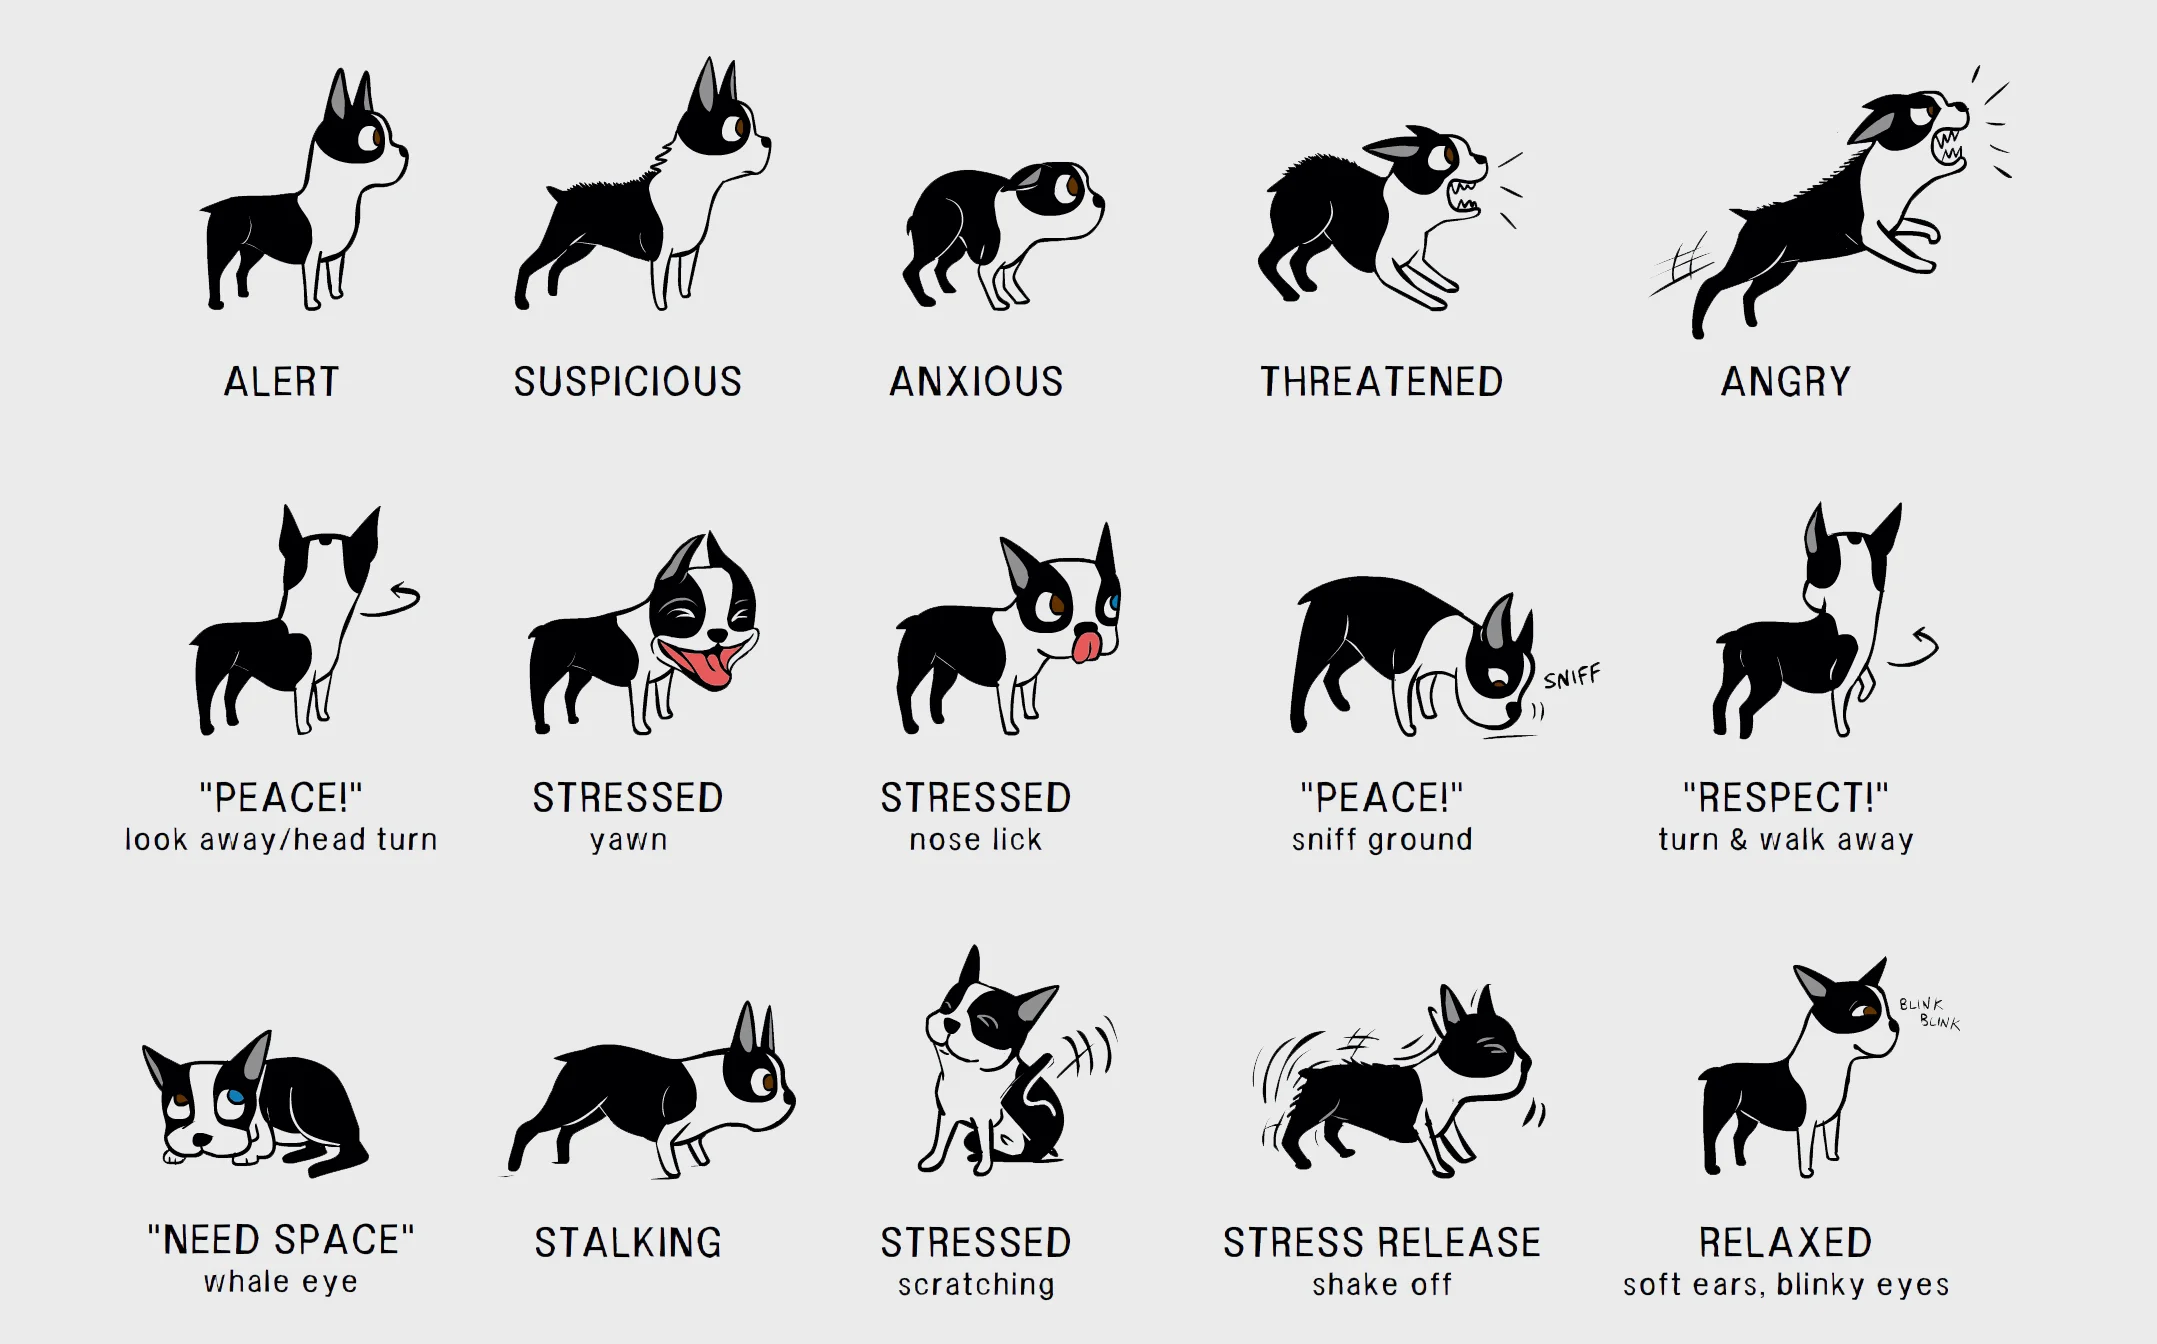 Illustration of dog body language with various behaviors like alert, suspicious, anxious, threatened, angry, stressed, and relaxed along with descriptive captions explaining each pose.